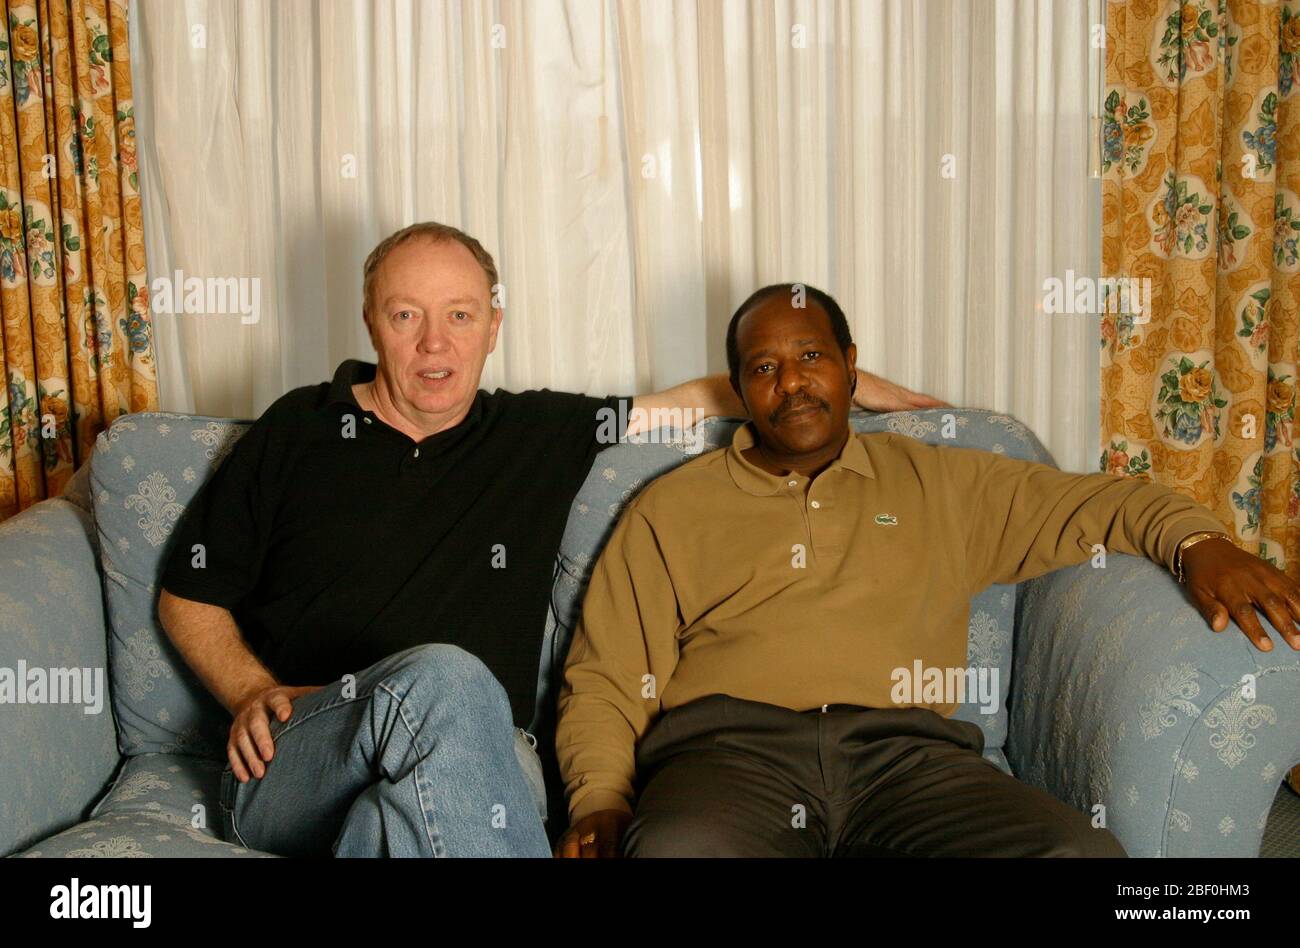 Director Terry George with Paul Rusesabagina in Philadelphia, PA.  November, 2004.  George's new film HOTEL RWANDA tells the story of Rusesabagina - a hotel manager who housed over a thousand Tutsis refugees during their struggle against the Hutu militia in Rwanda.  Credit: Scott Weiner/MediaPunch Stock Photo